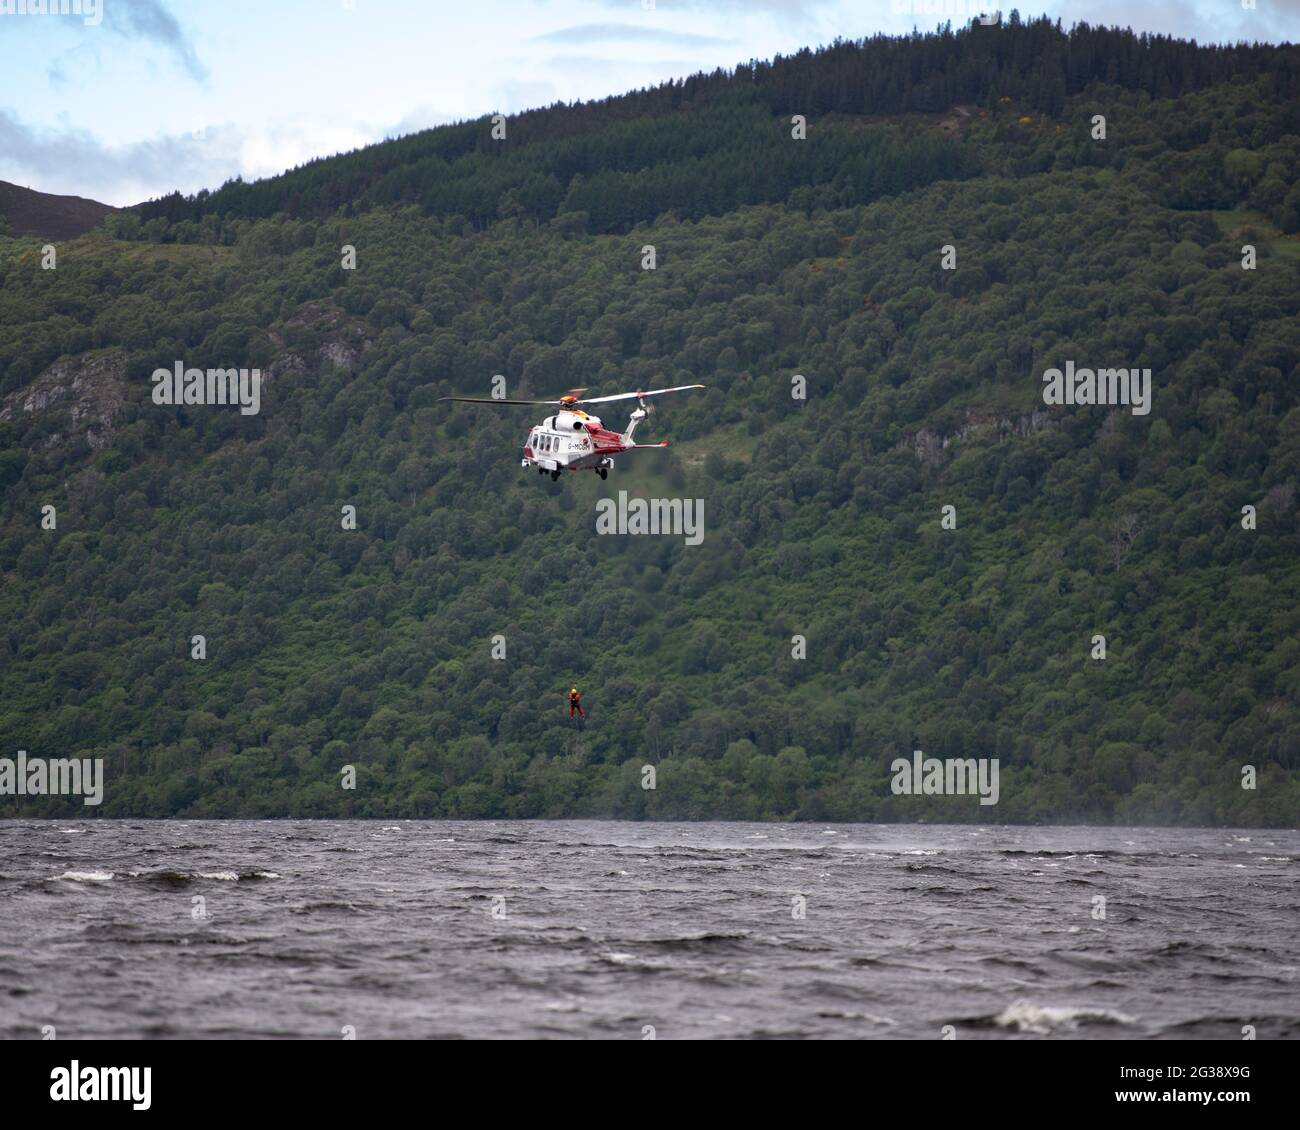 Dores, Loch Ness, Scotland, UK. 14th June, 2021. Pictured: Coast Guard helicopter seen hovering above the deep and murky waters of Loch Ness where there have been many Loch Ness Monster sightings from Dores beach. The helicopter is seen lowering personnel into the loch to perform a water rescue from the airborne platform whilst hovering less than a hundred feet above the water surface. Credit: Colin Fisher/Alamy Live News Stock Photo